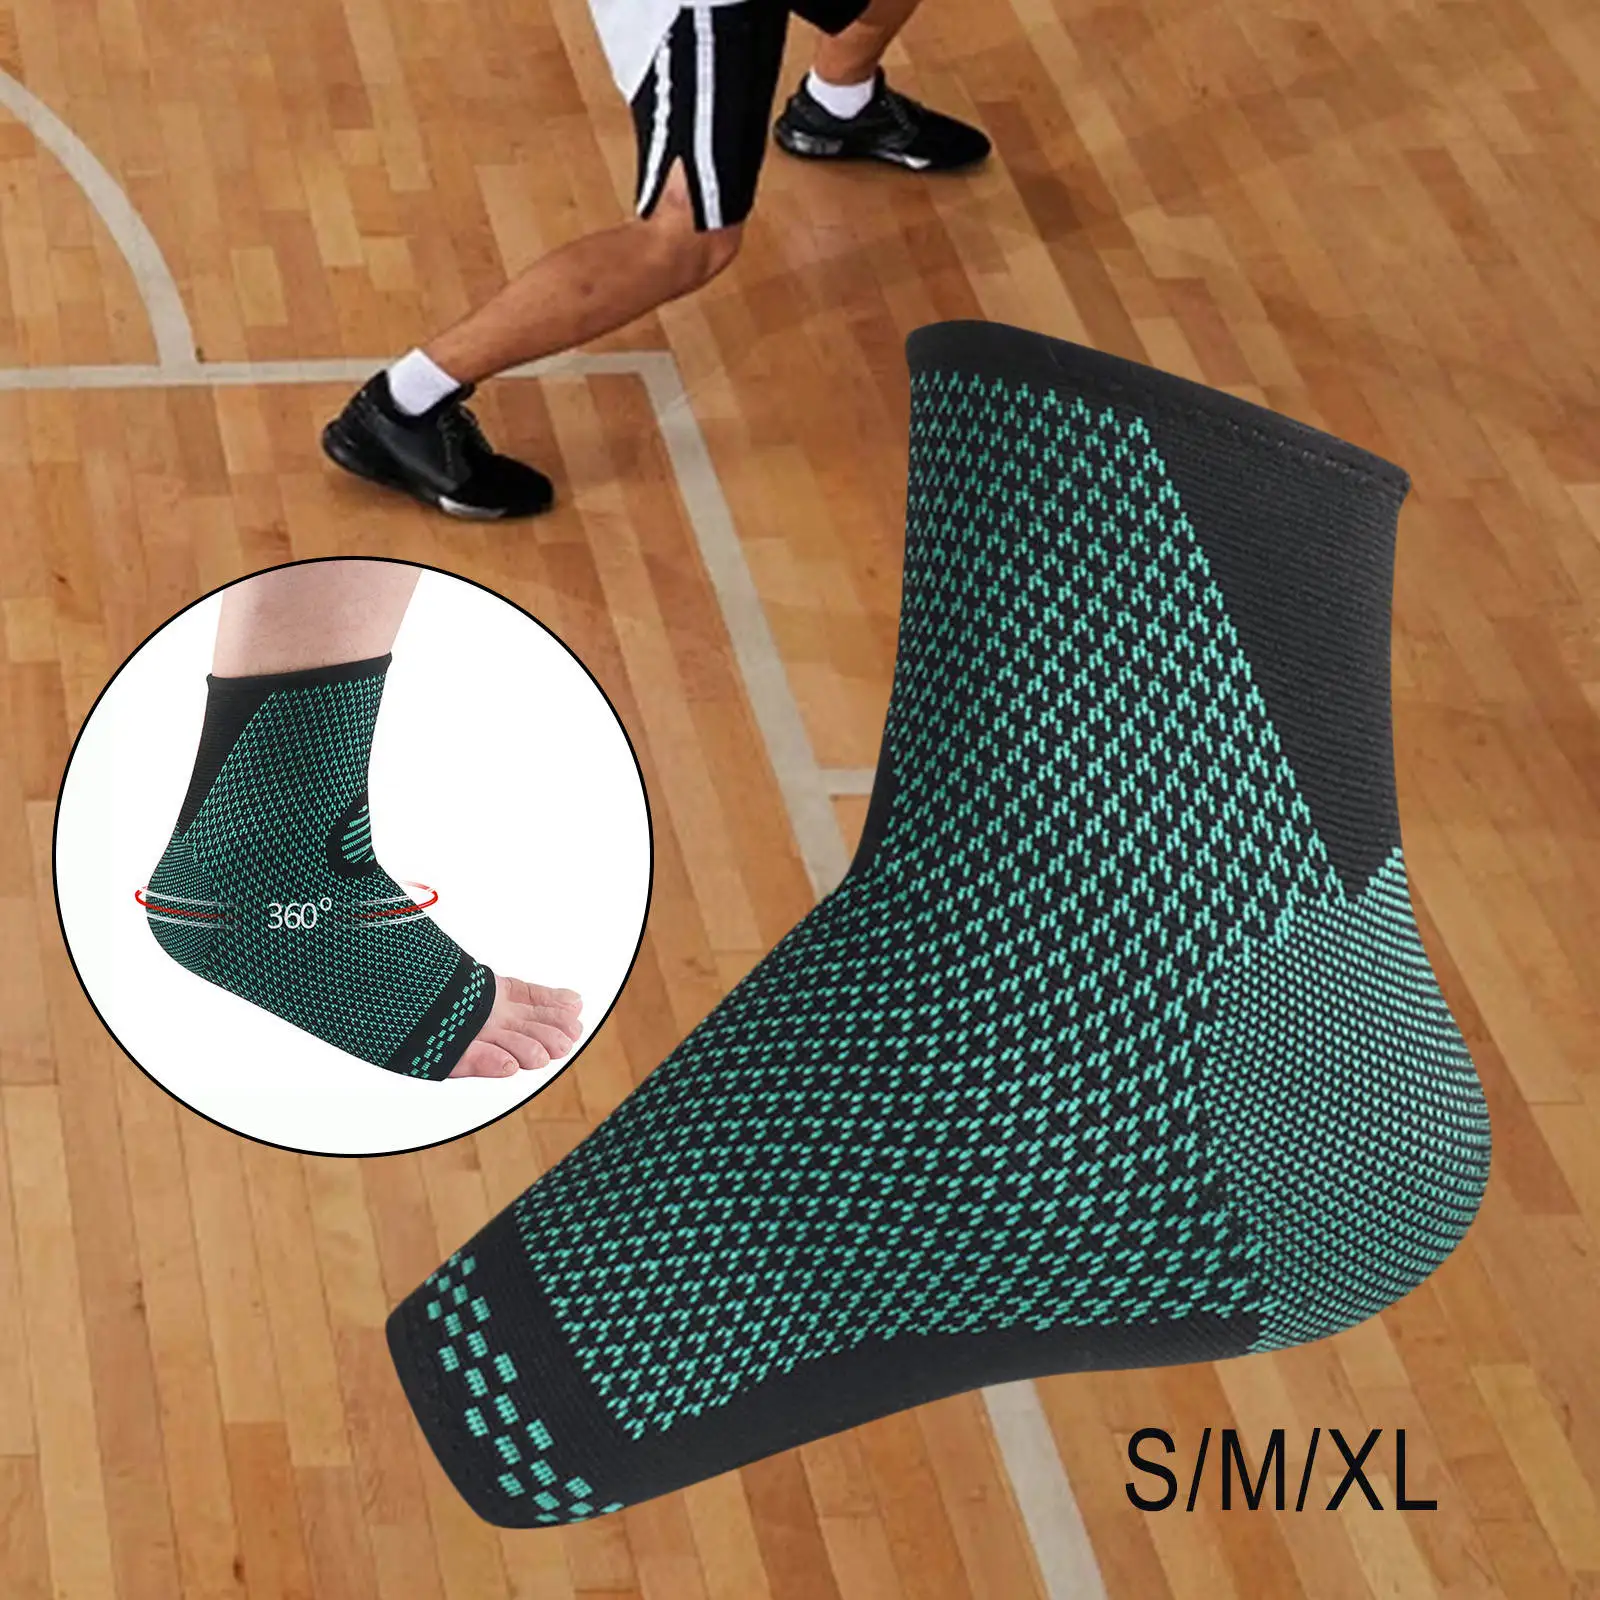 Plantar Fasciitis Compression Socks Foot Protection Foot Sleeve for Sports Fitness